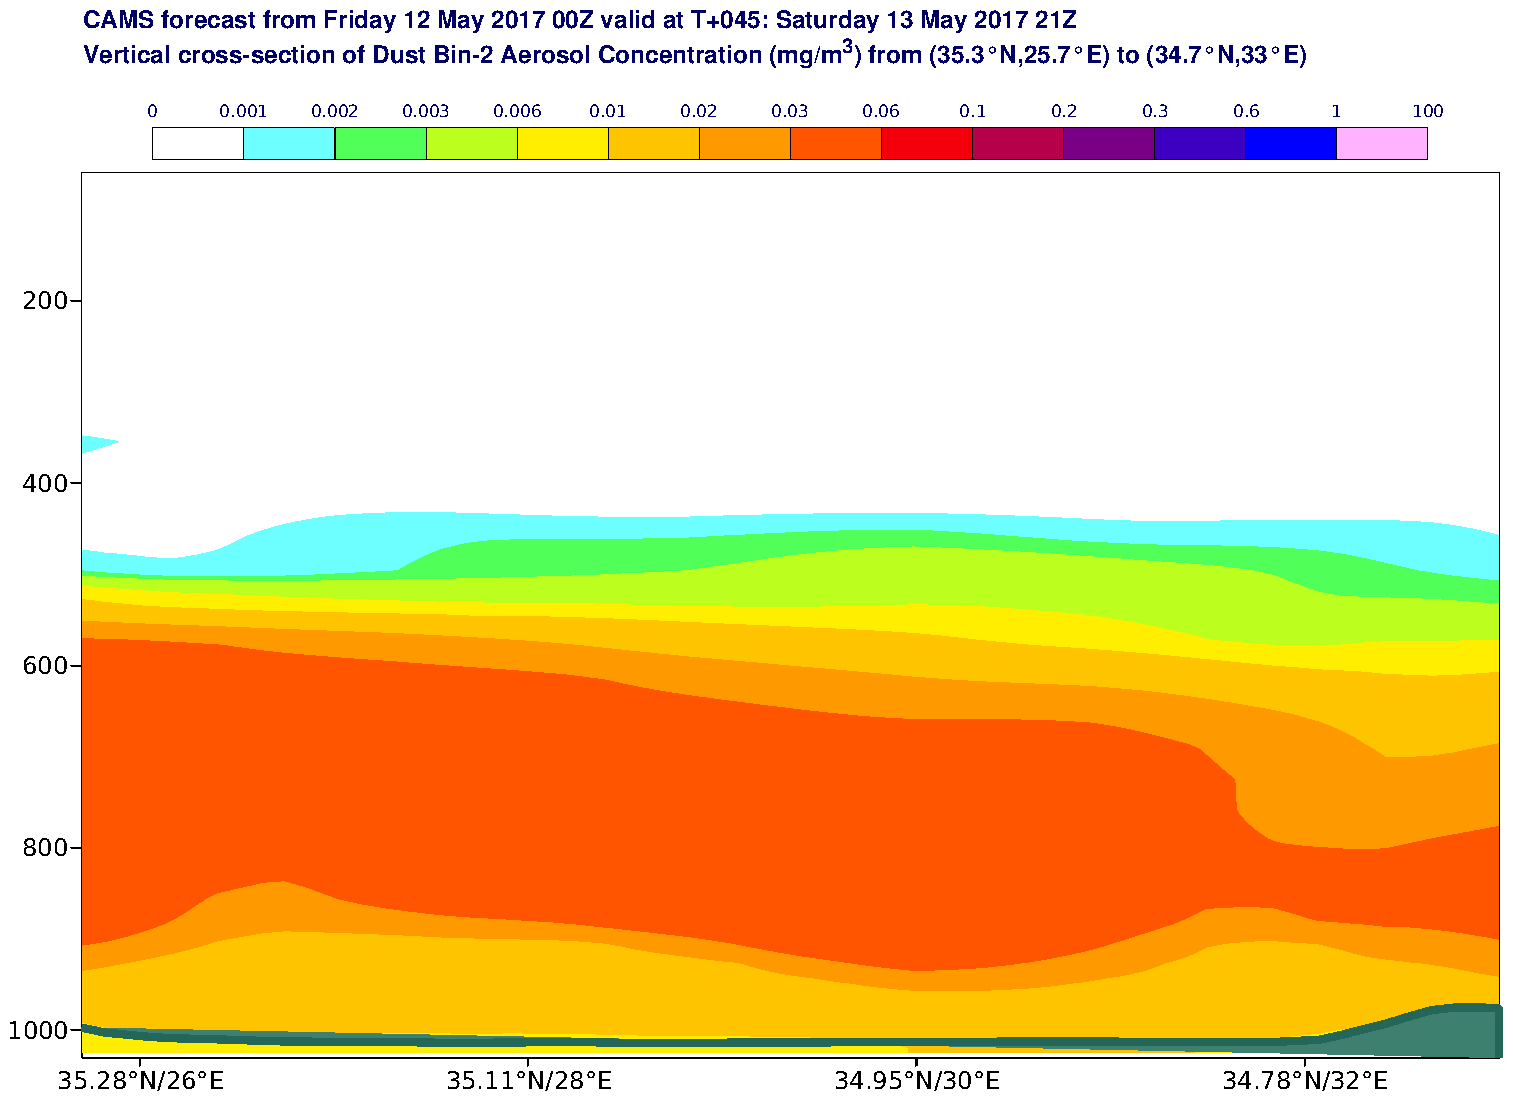 Vertical cross-section of Dust Bin-2 Aerosol Concentration (mg/m3) valid at T45 - 2017-05-13 21:00